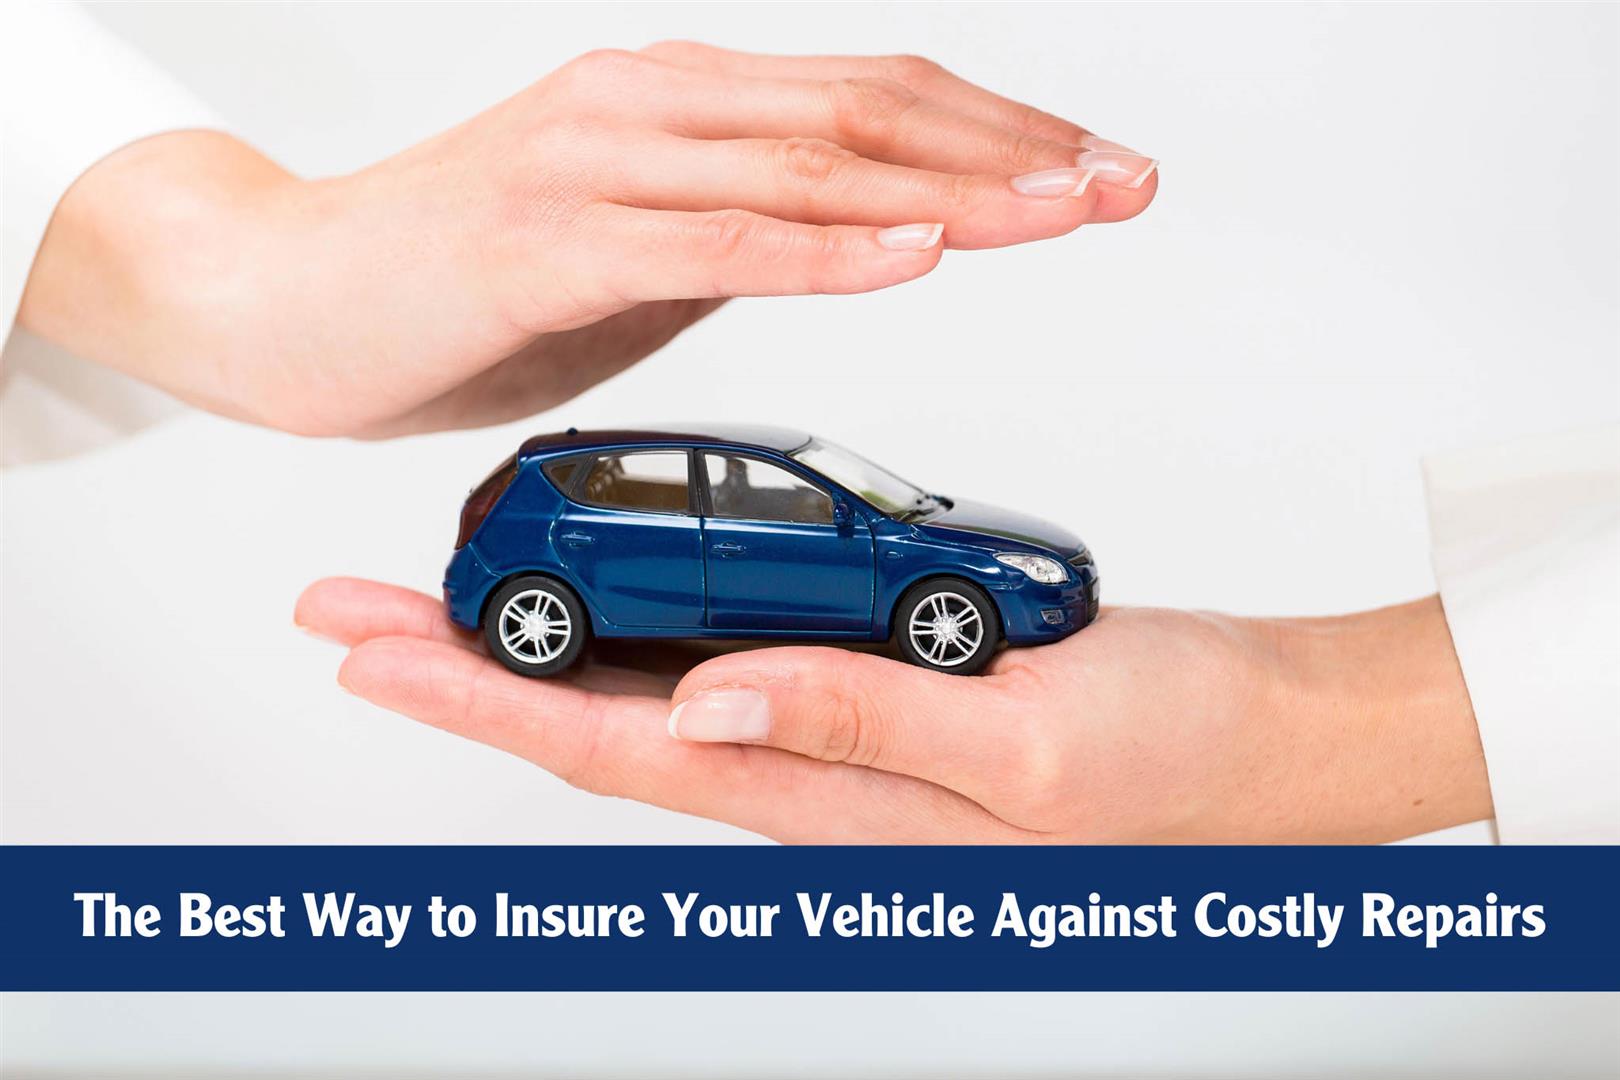 The Best Way to Insure Your Vehicle Against Costly Auto Repairs